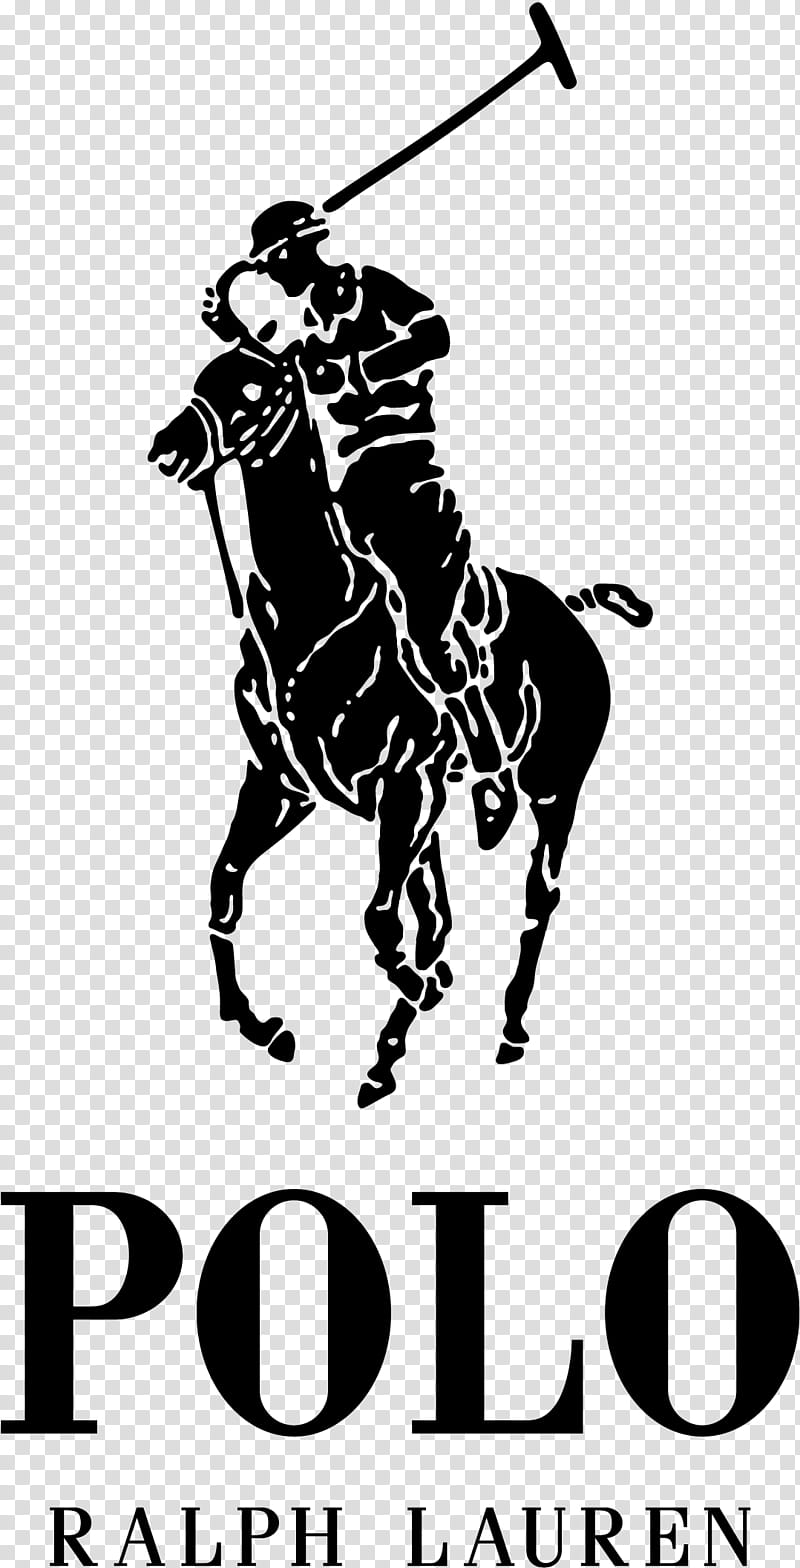 Ralph Lauren Logo, Clothing, Polo Shirt, cdr, Fashion, Designer Clothing, Drawing, Animal Sports transparent background PNG clipart